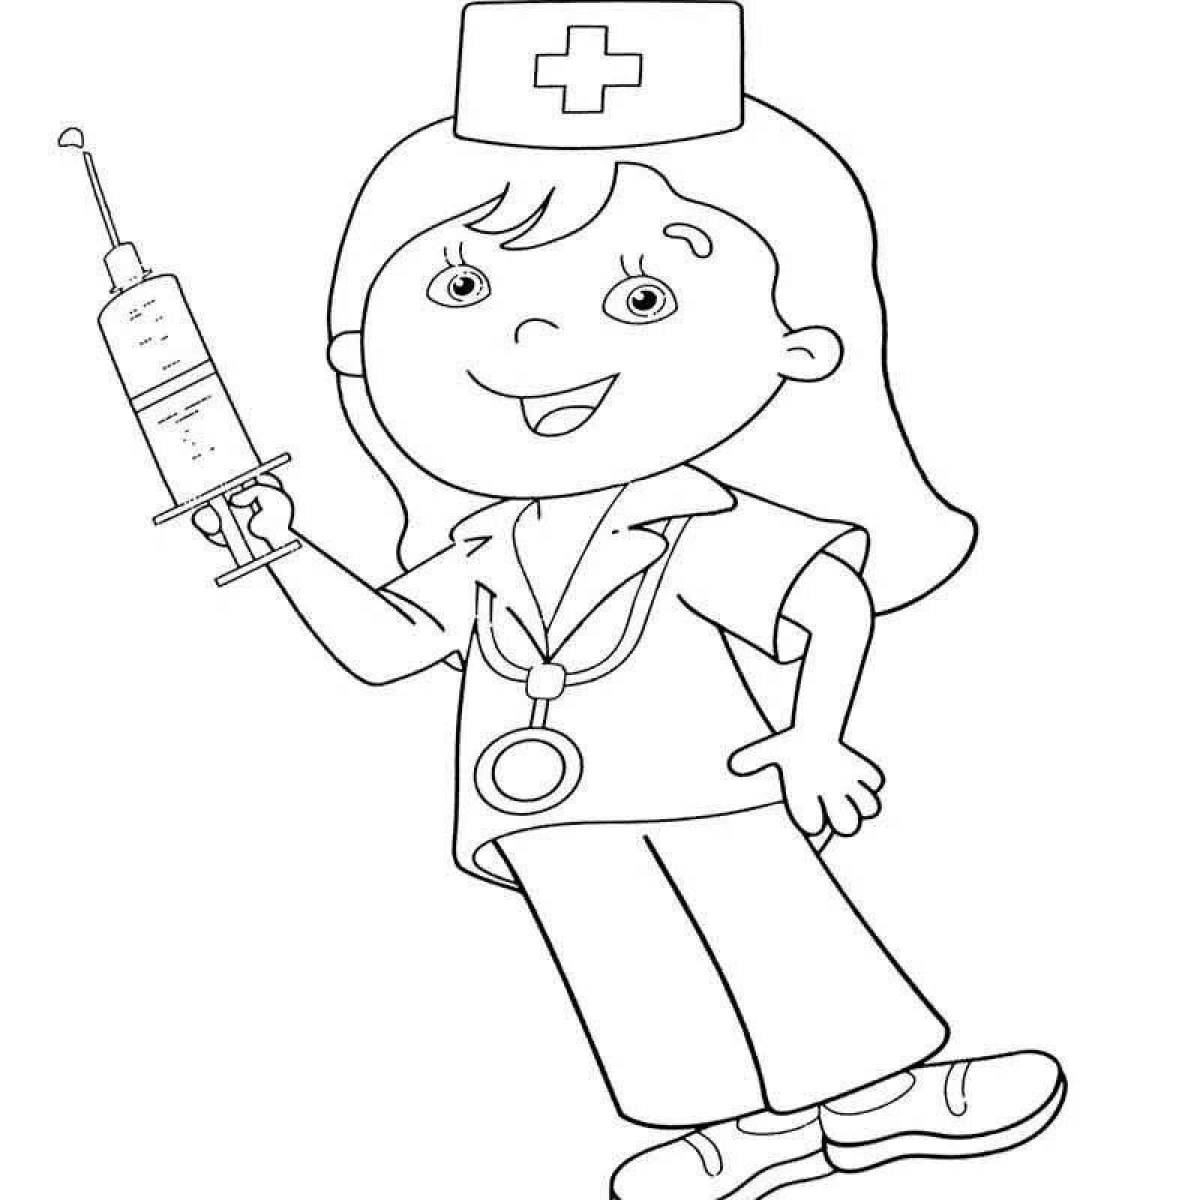 Coloring page excited nurse